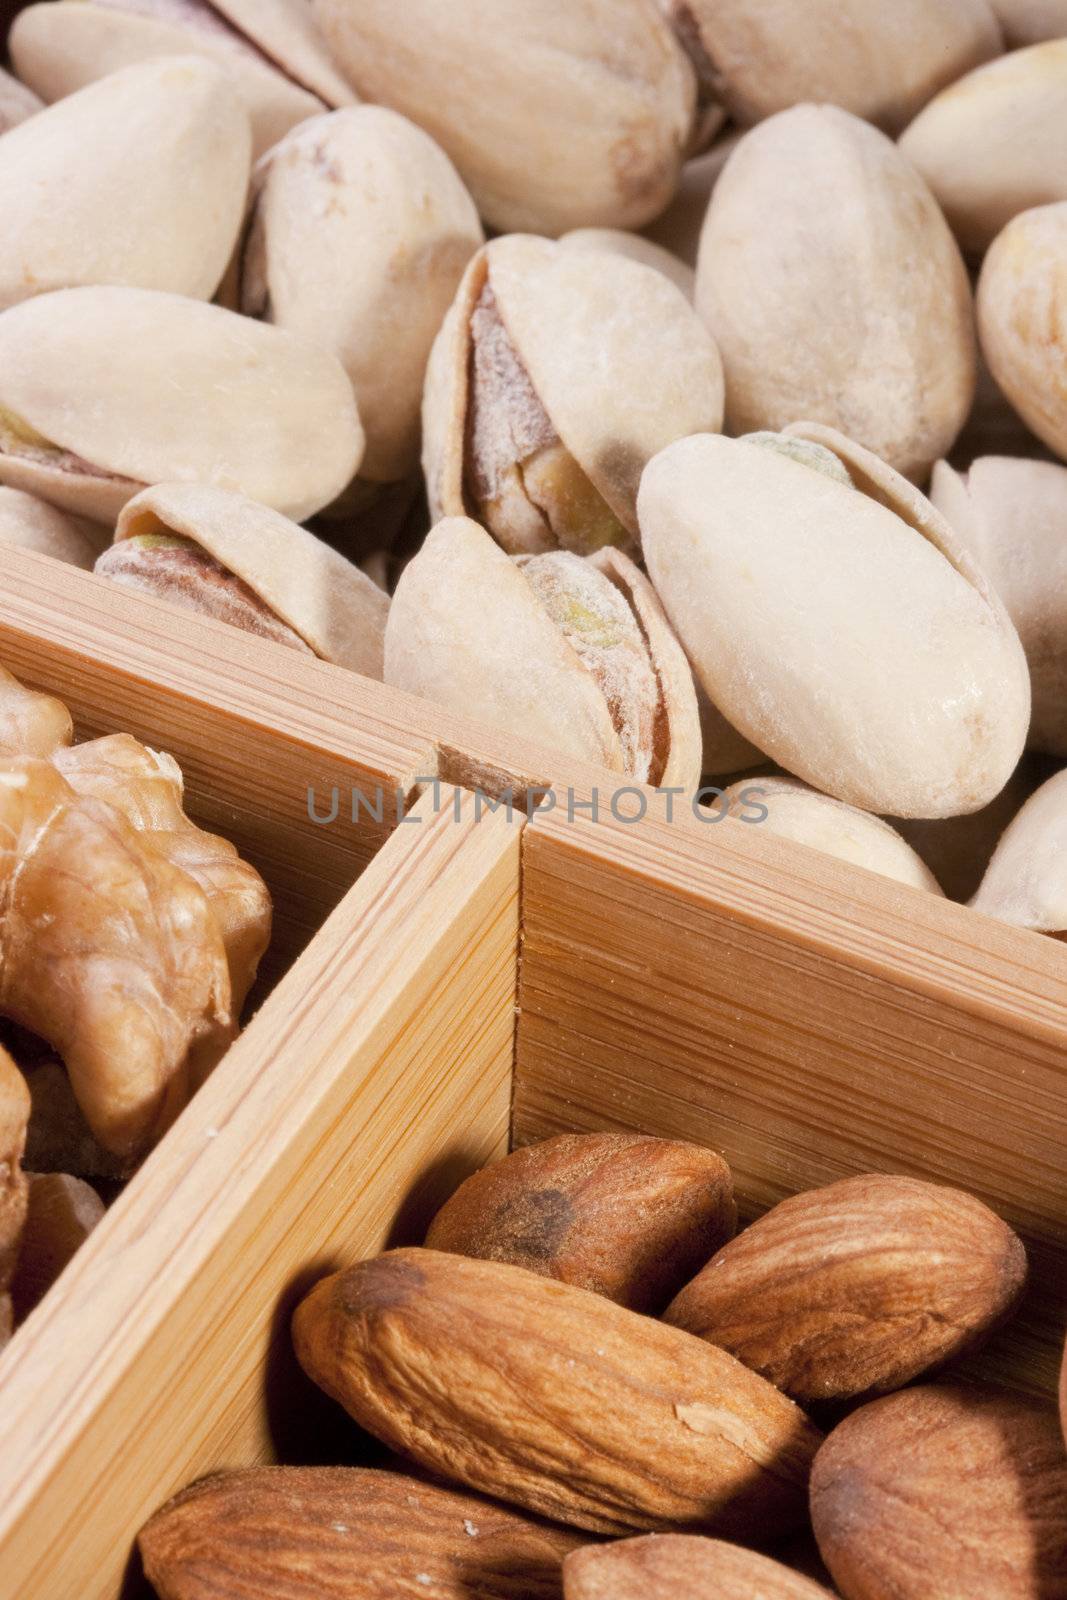 Nuts Almond in a wooden box together with nuts of other grades.